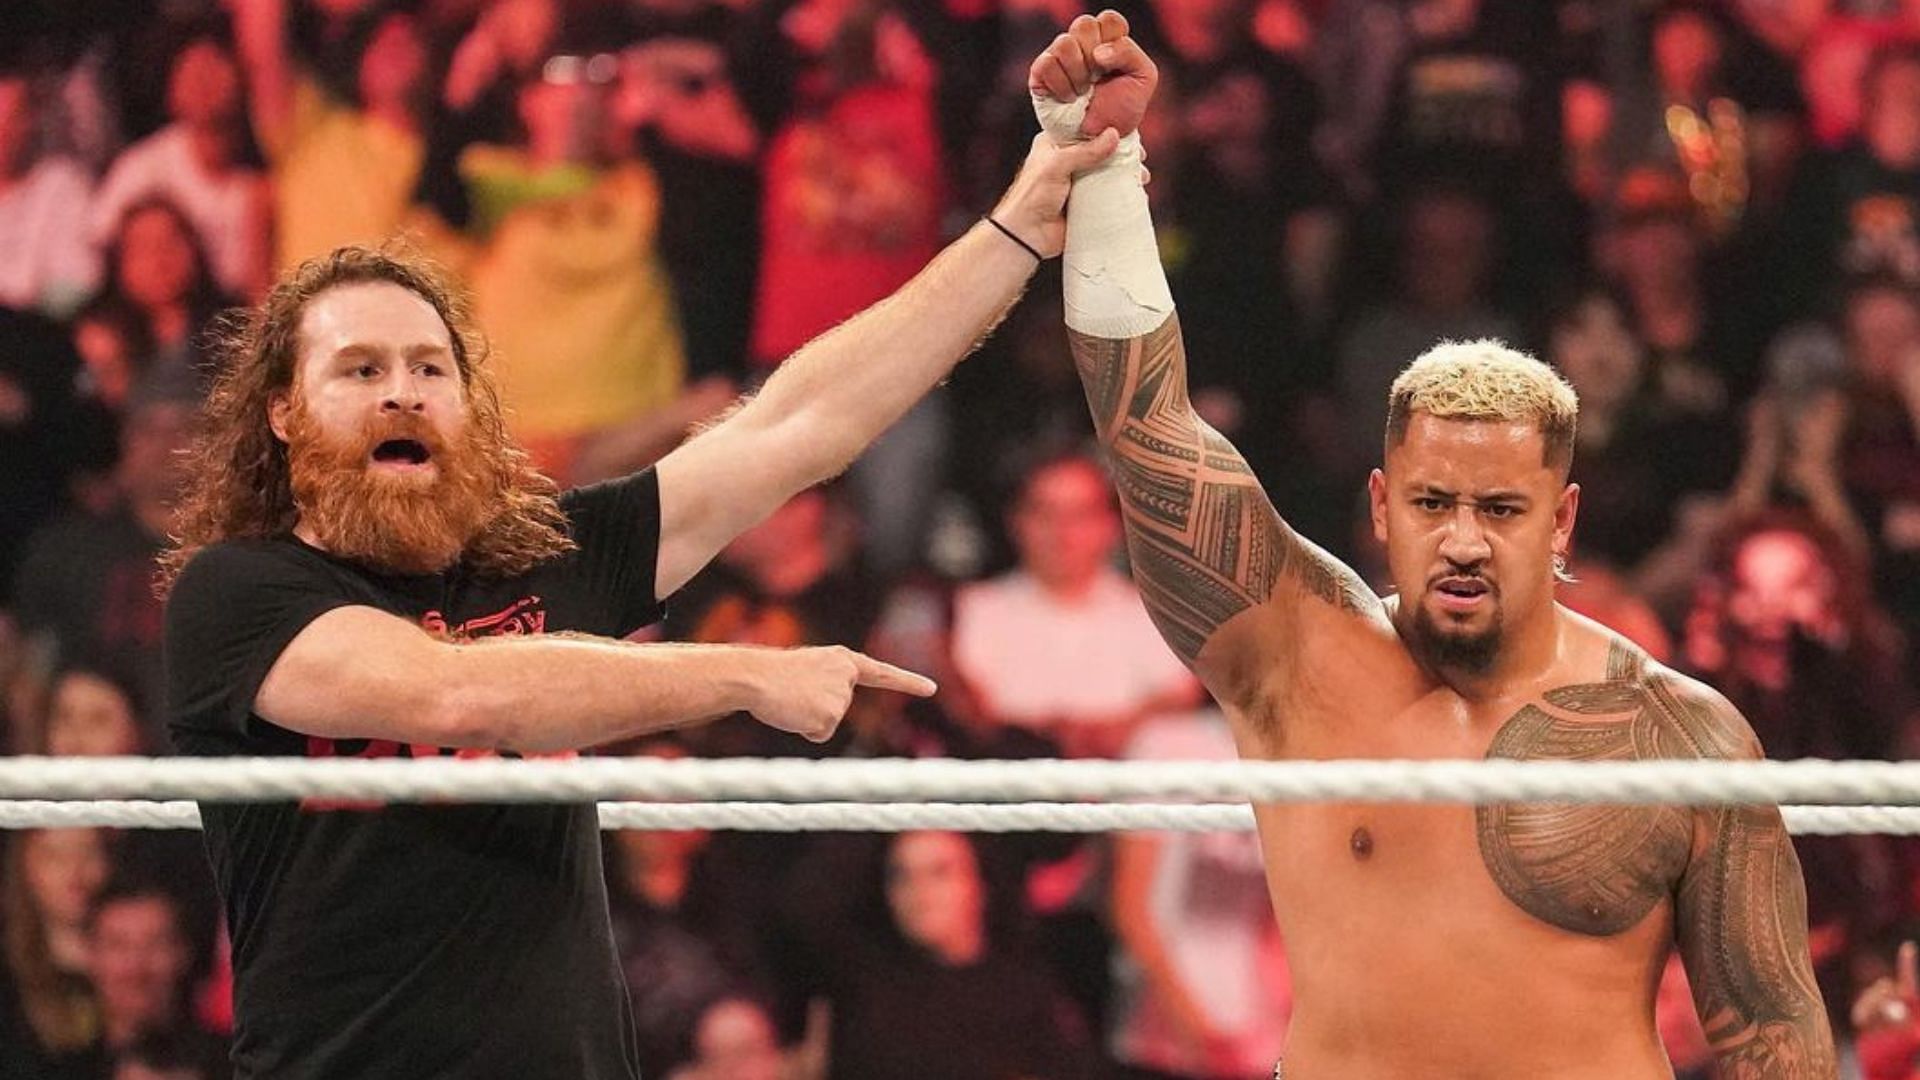 Solo Sikoa gained another impressive victory on the latest edition of WWE RAW